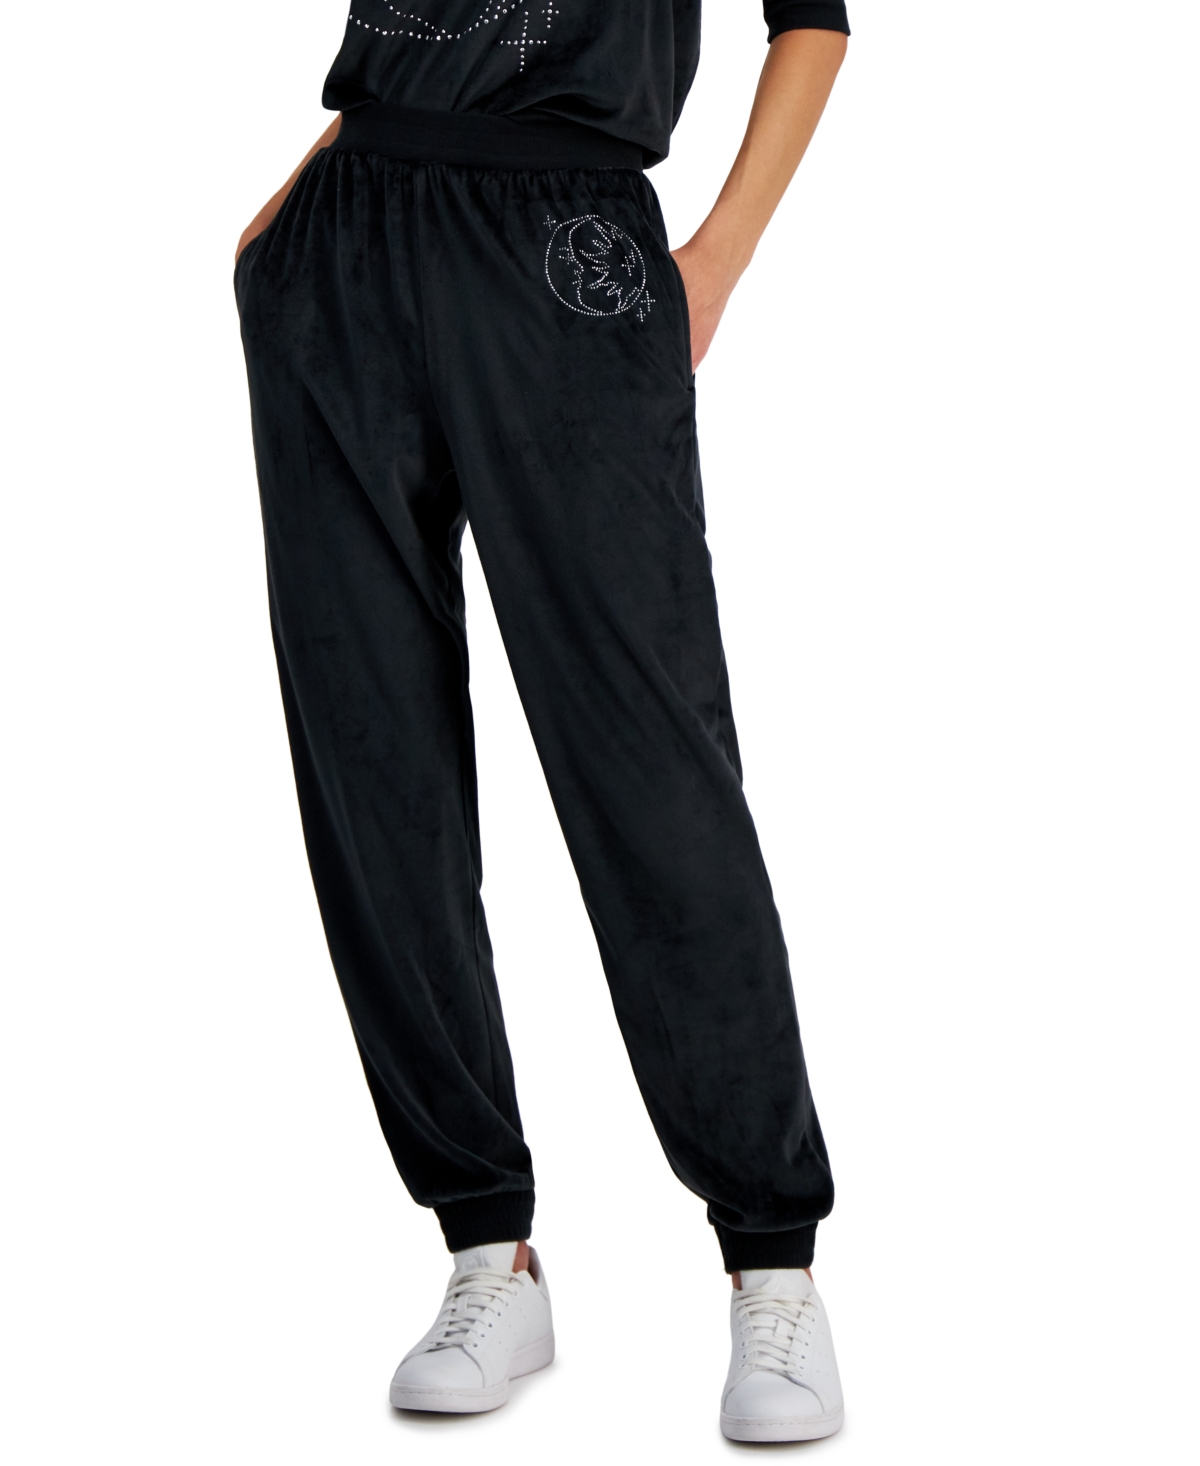 Grayson Threads, The Label Juniors' High-rise Velour Celestial Embellished Joggers In Black